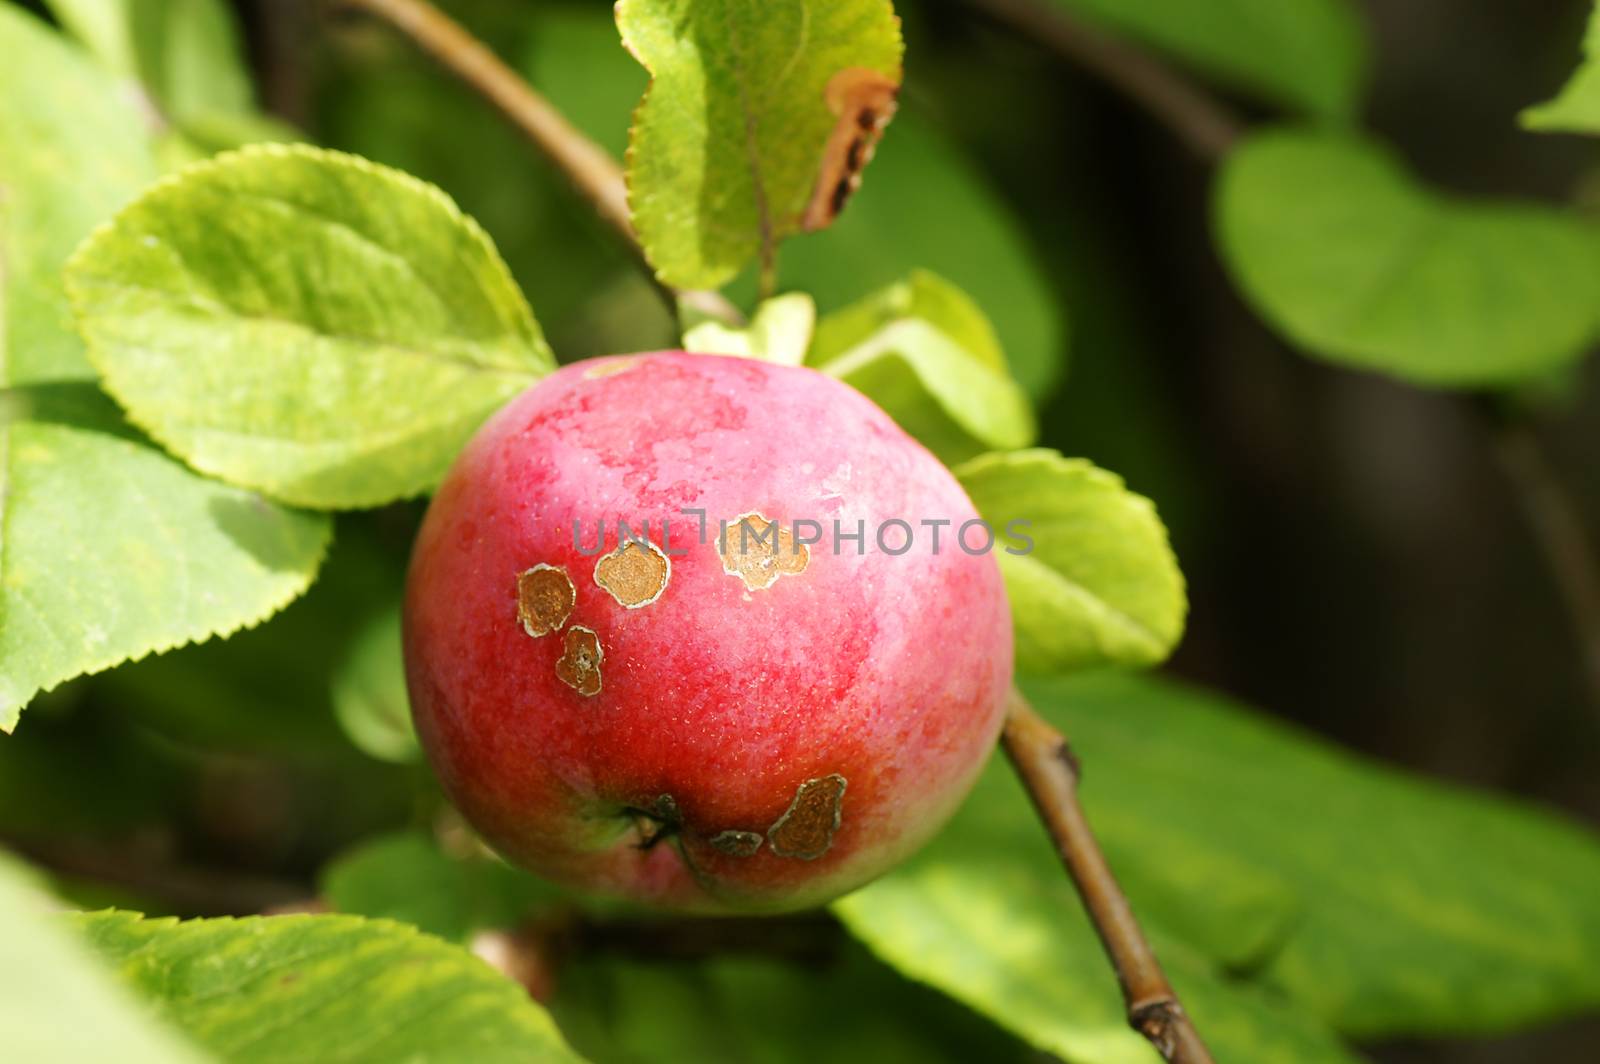 Agriculture concept: apple scab disease, caused by the fongus Venturia inaequalis